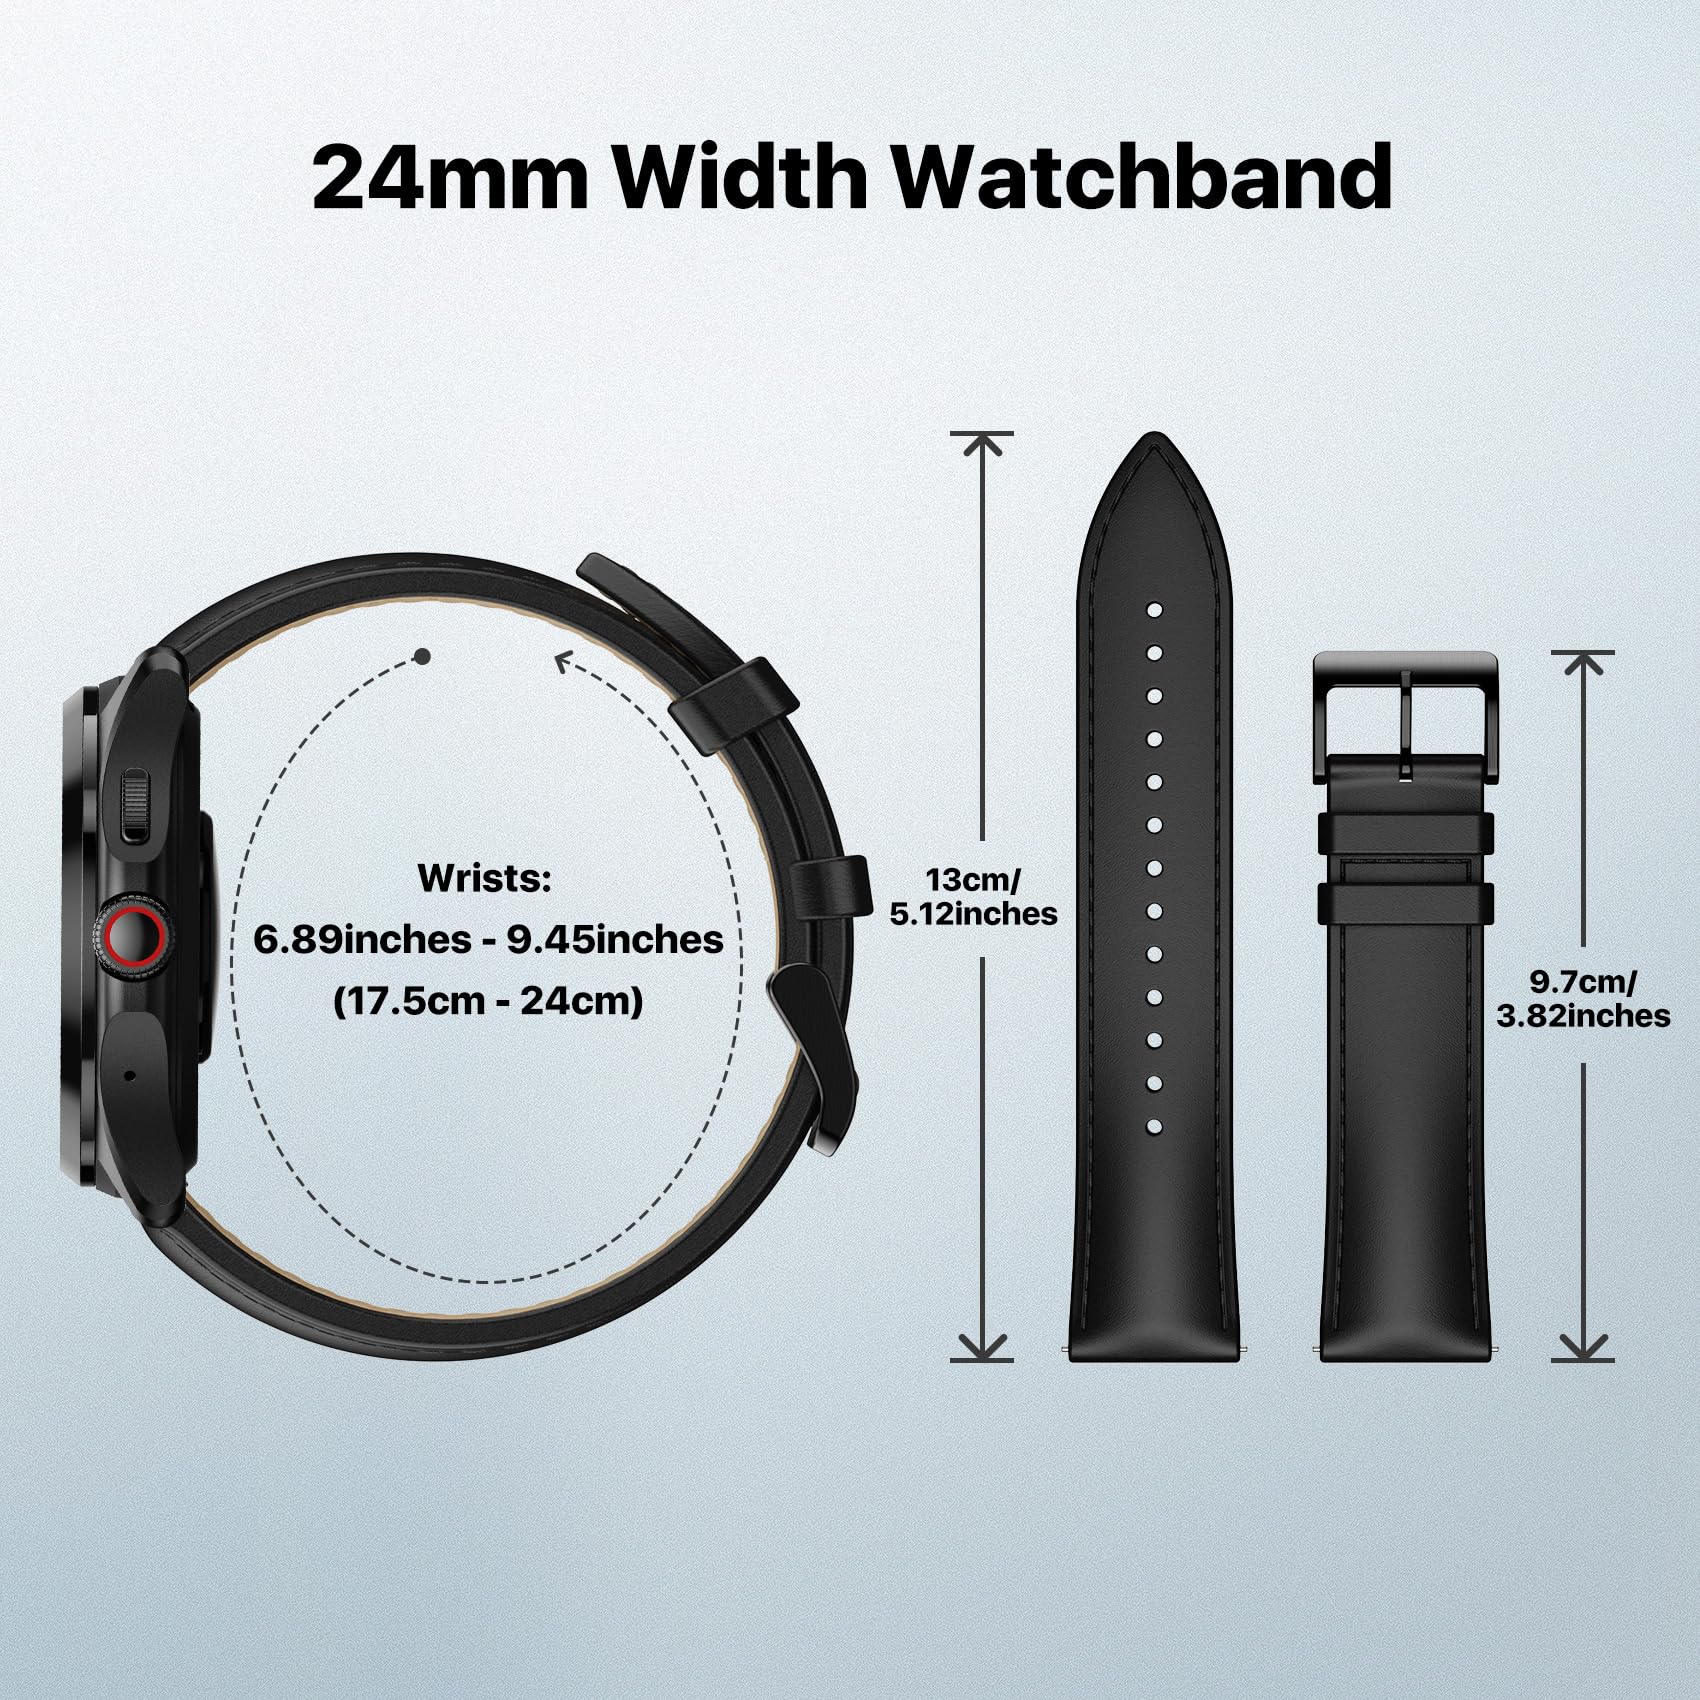 Ticwatch Pro 5 Android Smartwatch for Men Snapdragon W5+ Gen 1 Platform Plus 24mm Width Tuxedo Black Leather Watch Strap Quick Release Watch Band, Wear OS Smart Watch 80 Hrs Long Battery Life